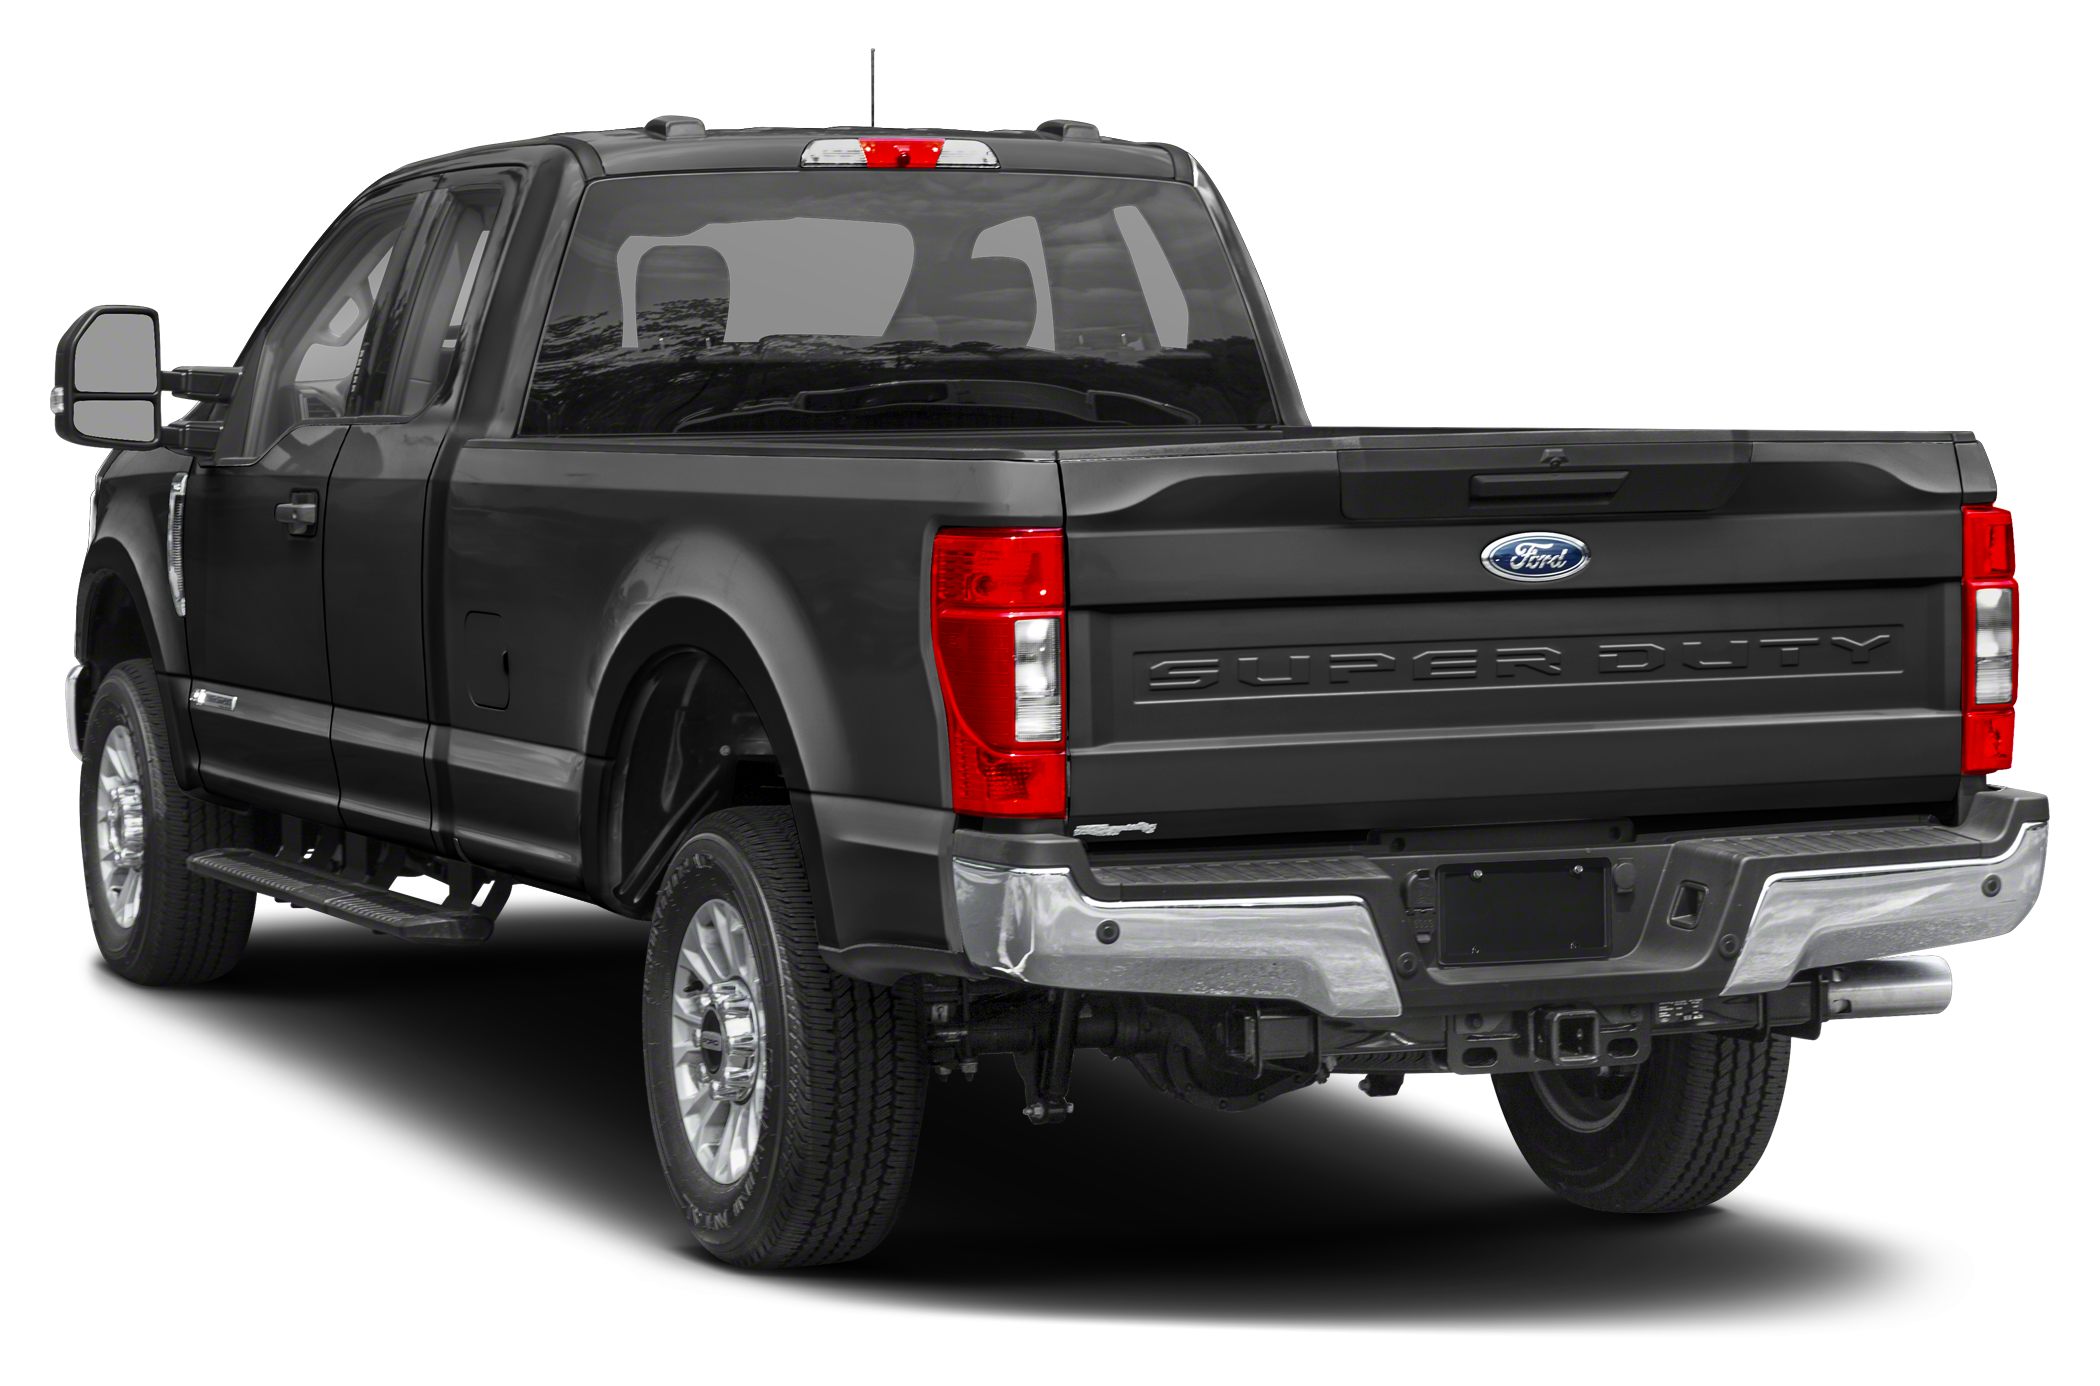 2022 Ford F250 Xlt Black Appearance Package Pricing Ford 2021 Exterior